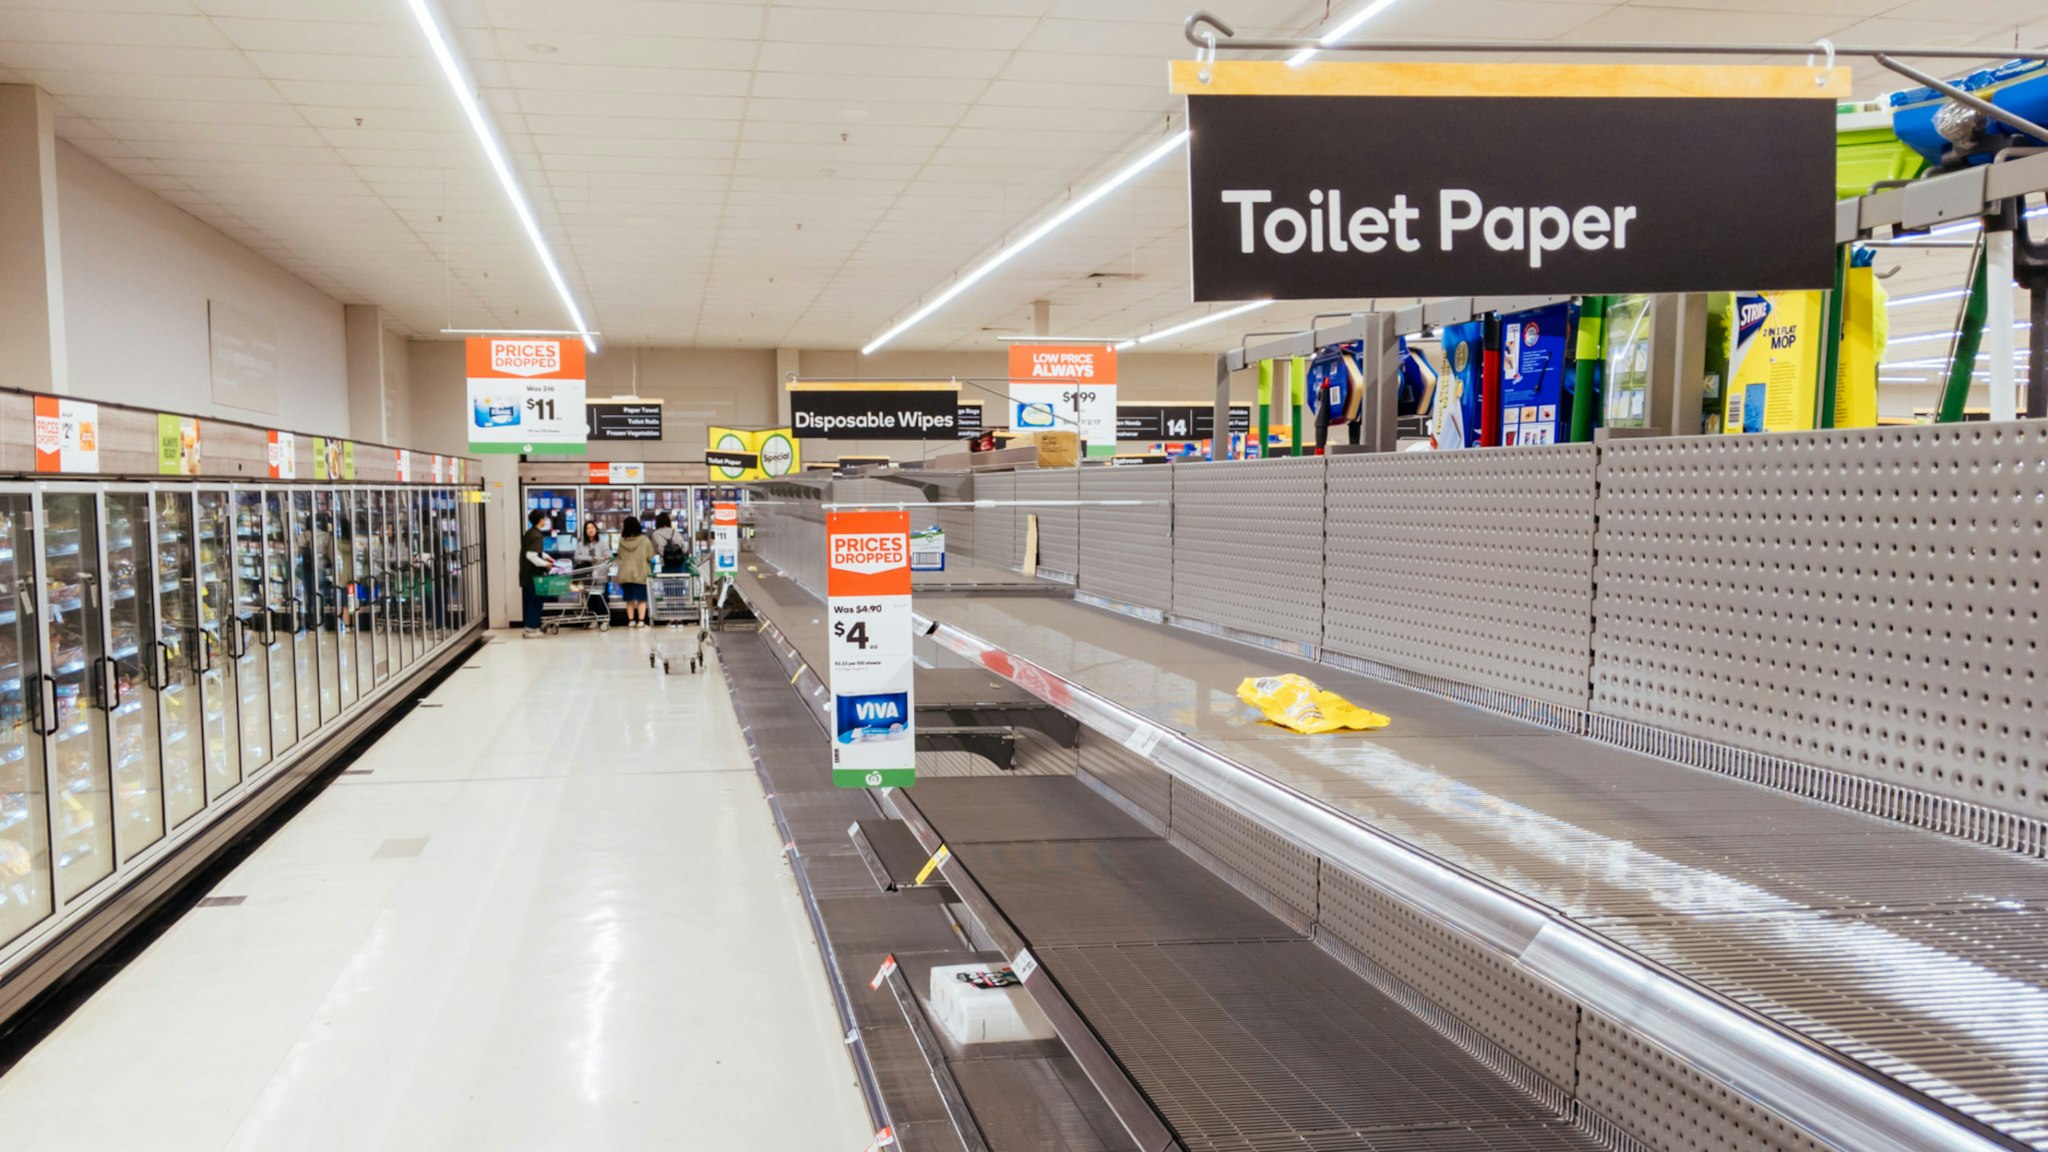 MARCH 4, 2020: Empty shelves in an Australian supermarket after panic buying due to the Corona Virus.